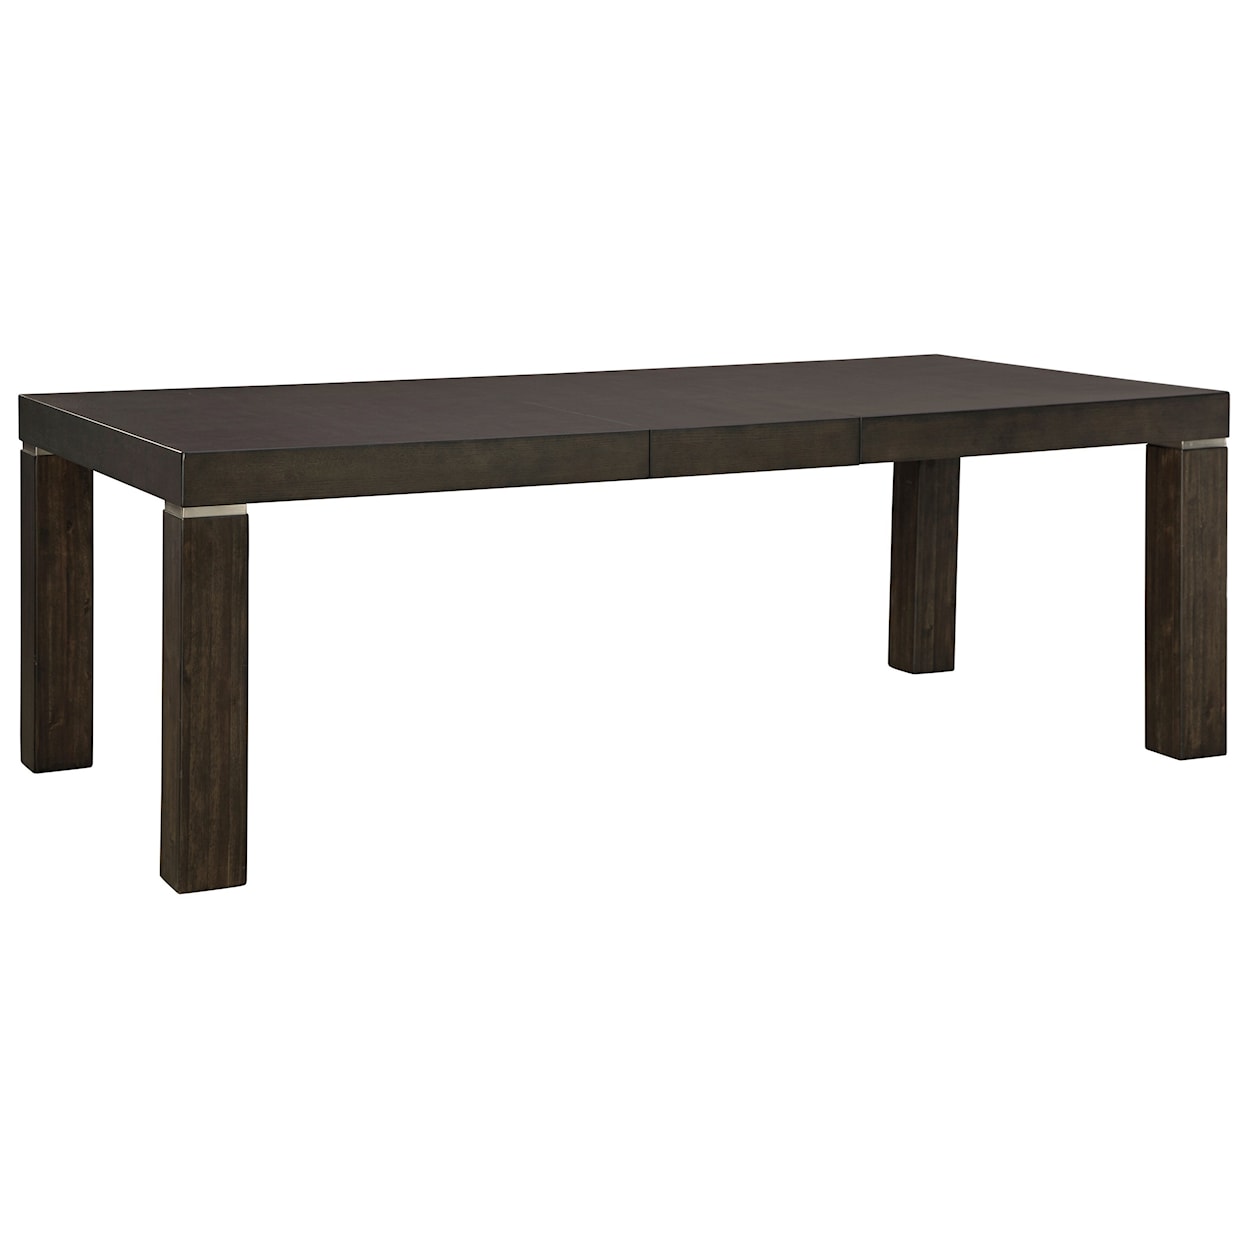 Ashley Furniture Signature Design Hyndell Rectangular Dining Room Extension Table